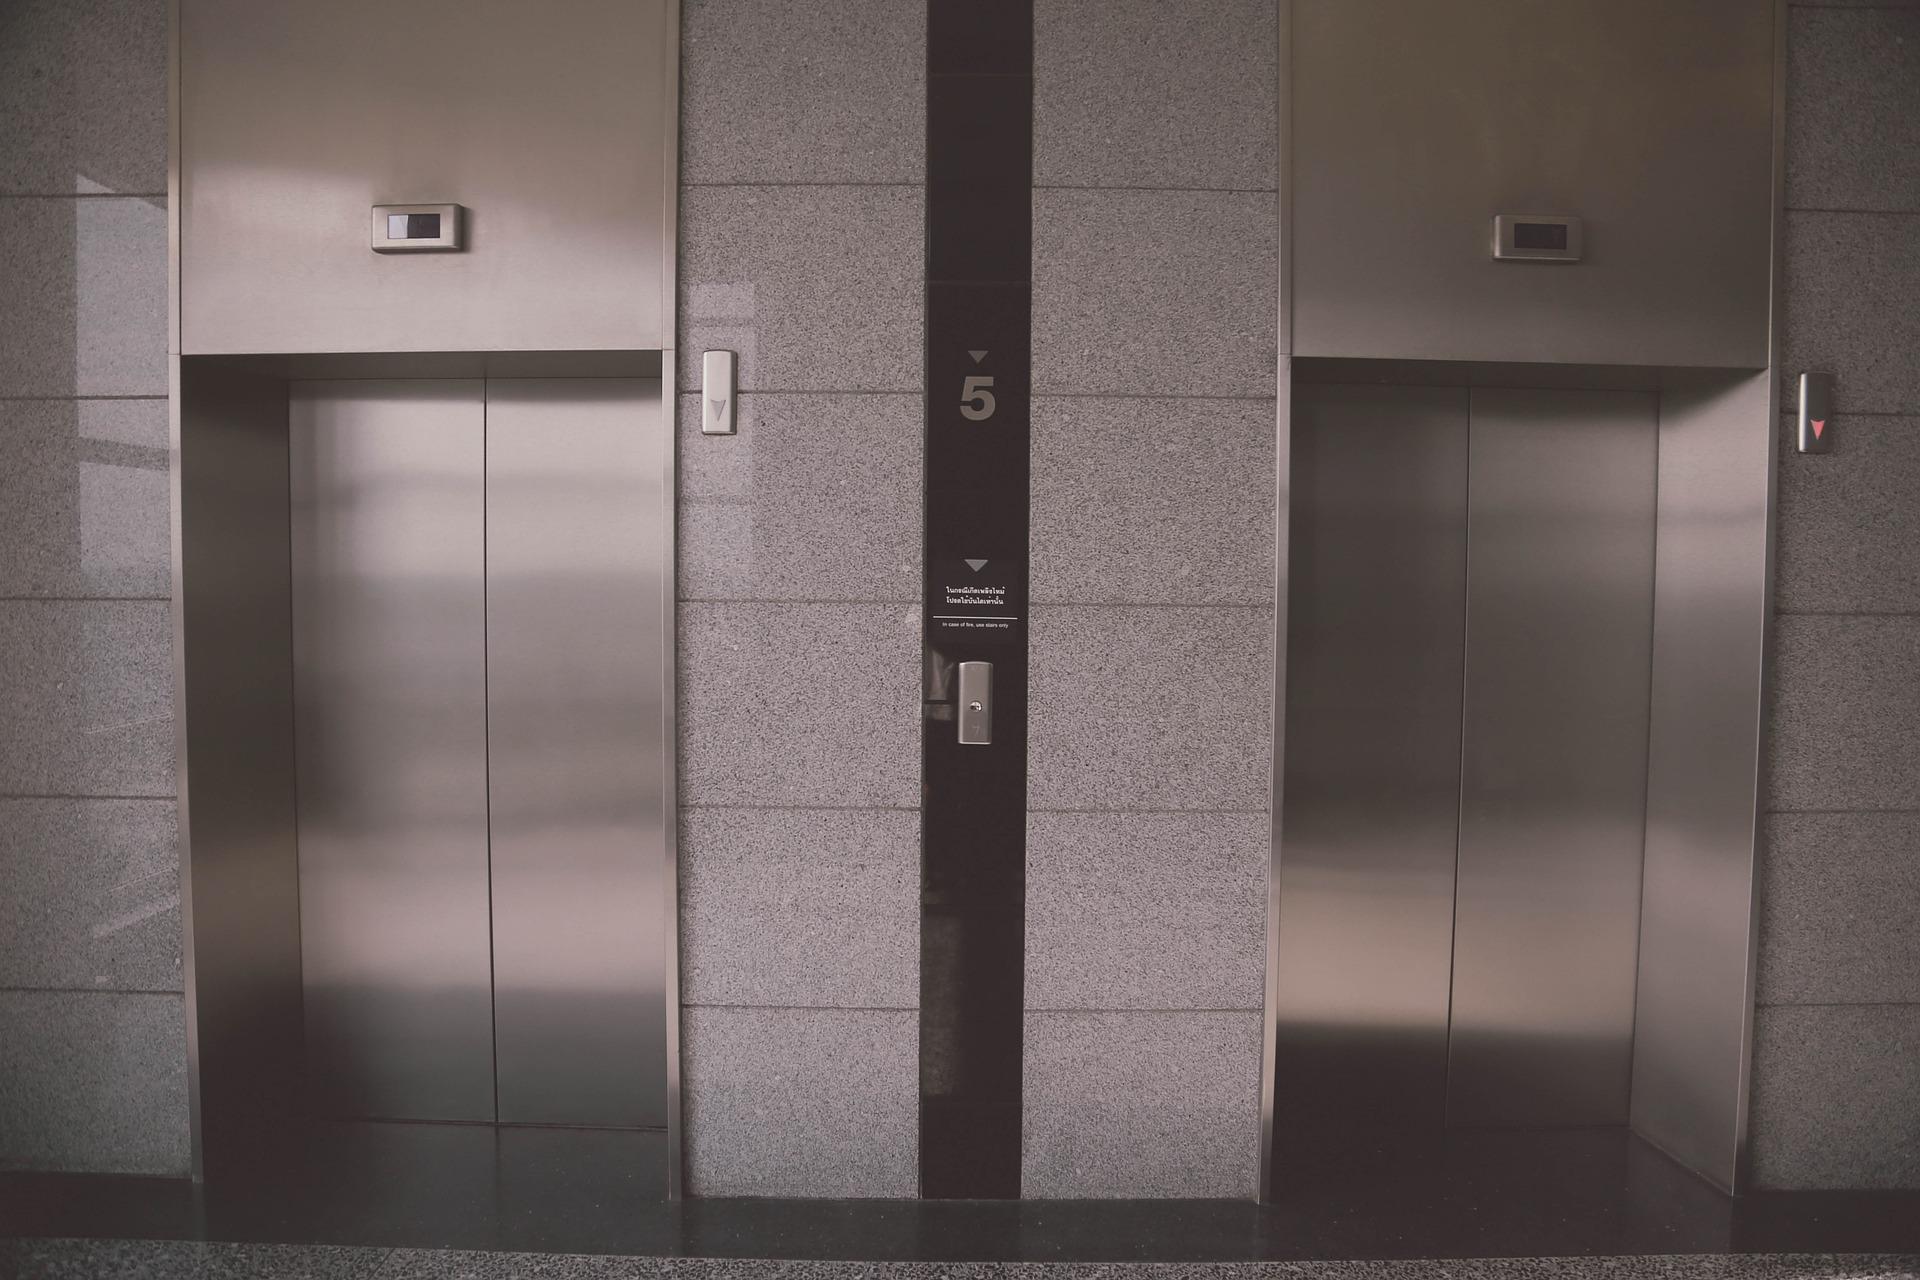 Three closed elevator doors on a gray tiled wall with a central call panel displaying the number 5, and emergency features indicated nearby to ensure safety against potential elevator accidents.